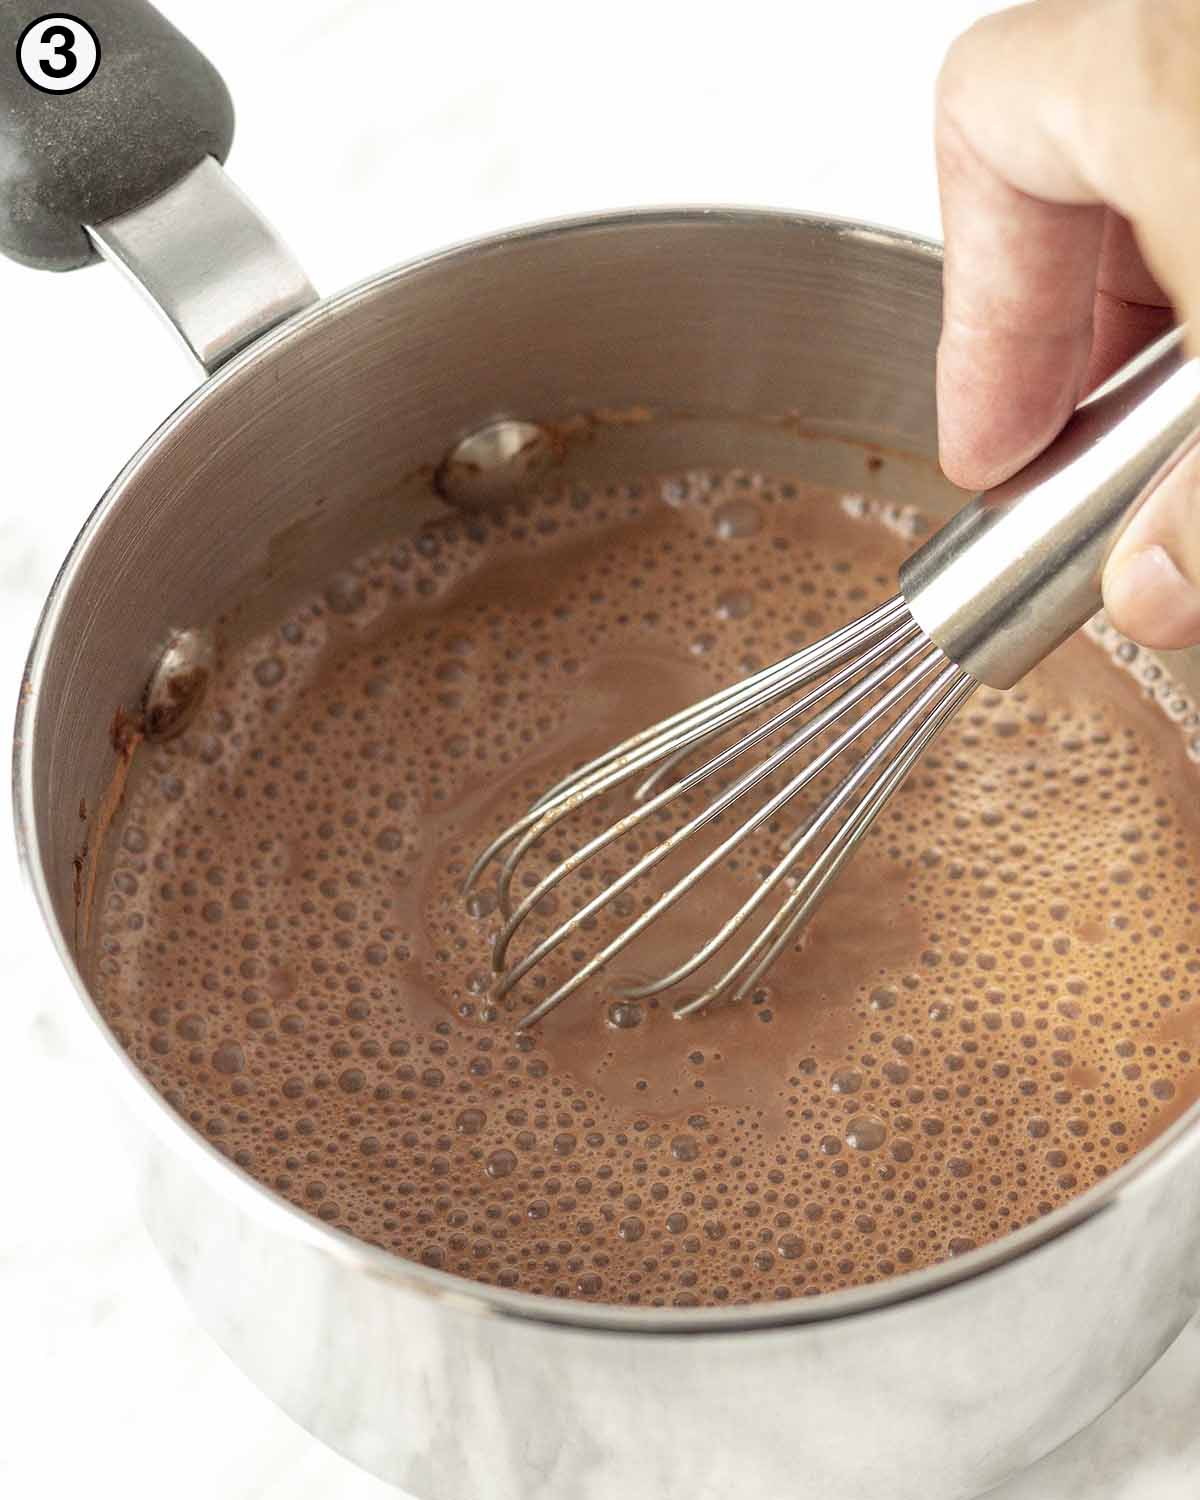 A hand using a metal whisk to mix hot chocolate in a small pot.